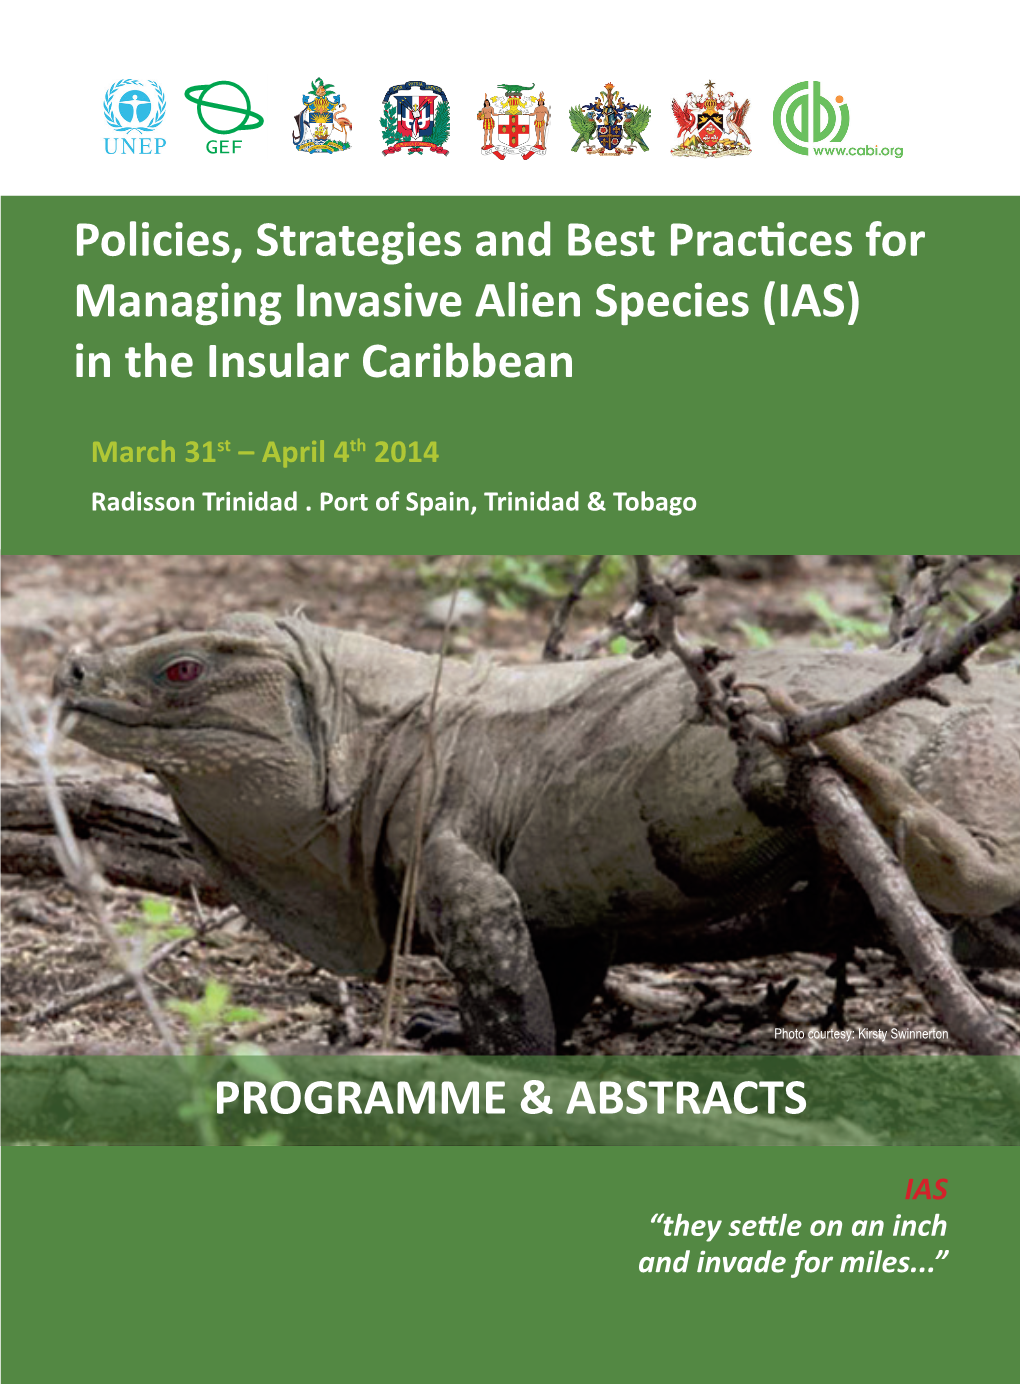 Policies, Strategies and Best Practices for Managing Invasive Alien Species (IAS) in the Insular Caribbean